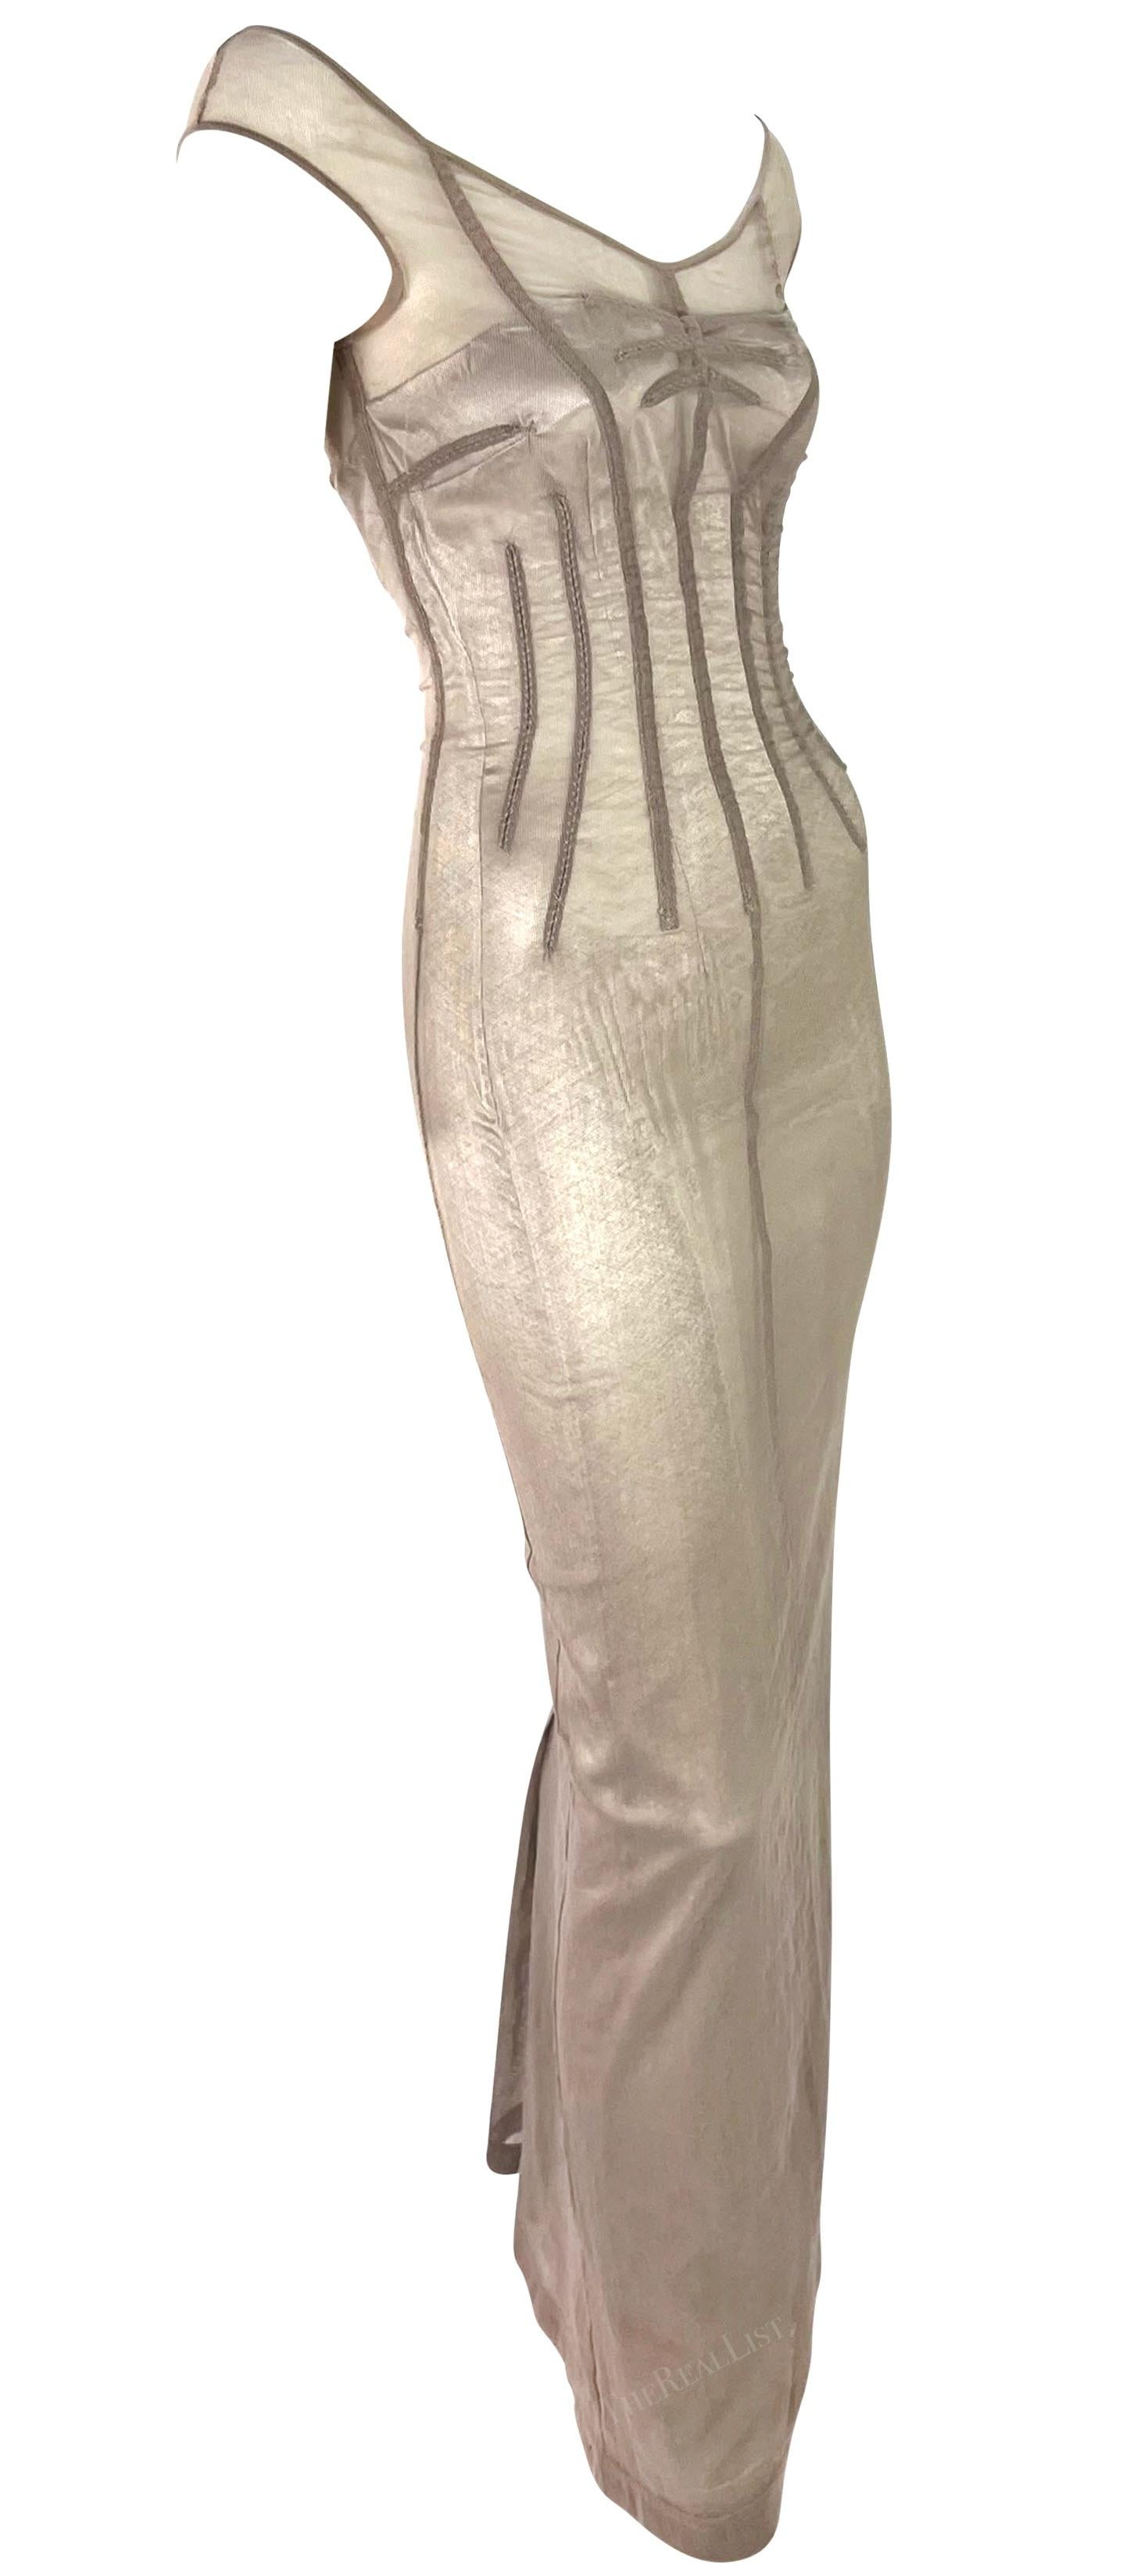 S/S 1998 Dolce & Gabbana 'Stromboli' Taupe Mesh Silver Bodycon Boned Gown  For Sale 2